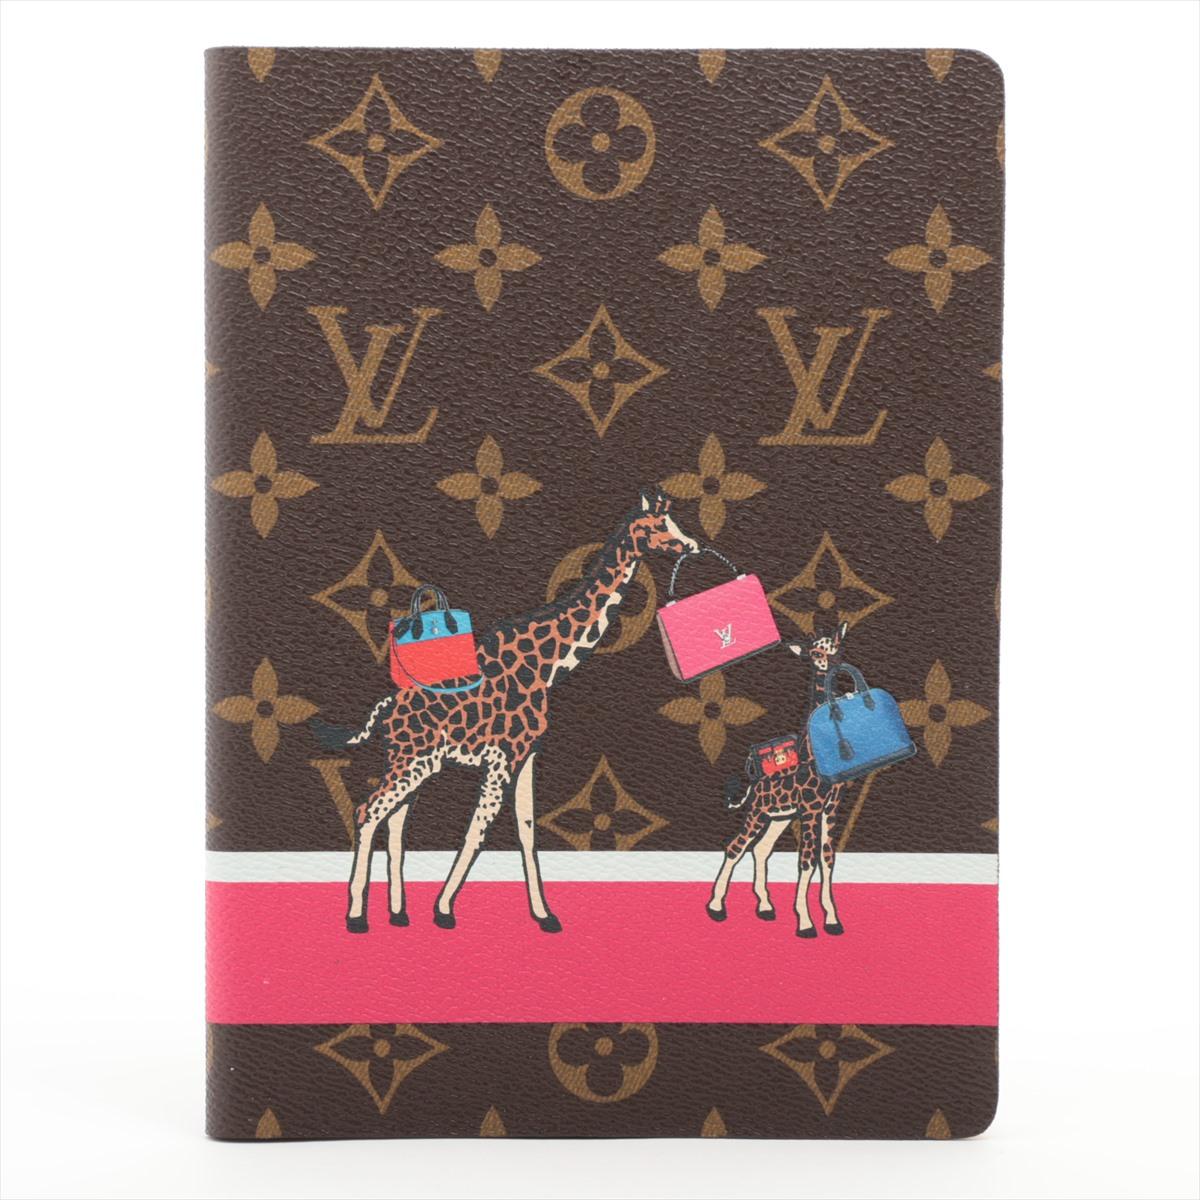 The Louis Vuitton Monogram Giraffe Clemence Notebook in Brown is a chic and sophisticated stationery accessory that seamlessly blends luxury with distinctive design. Crafted with meticulous attention to detail, the notebook features the iconic LV